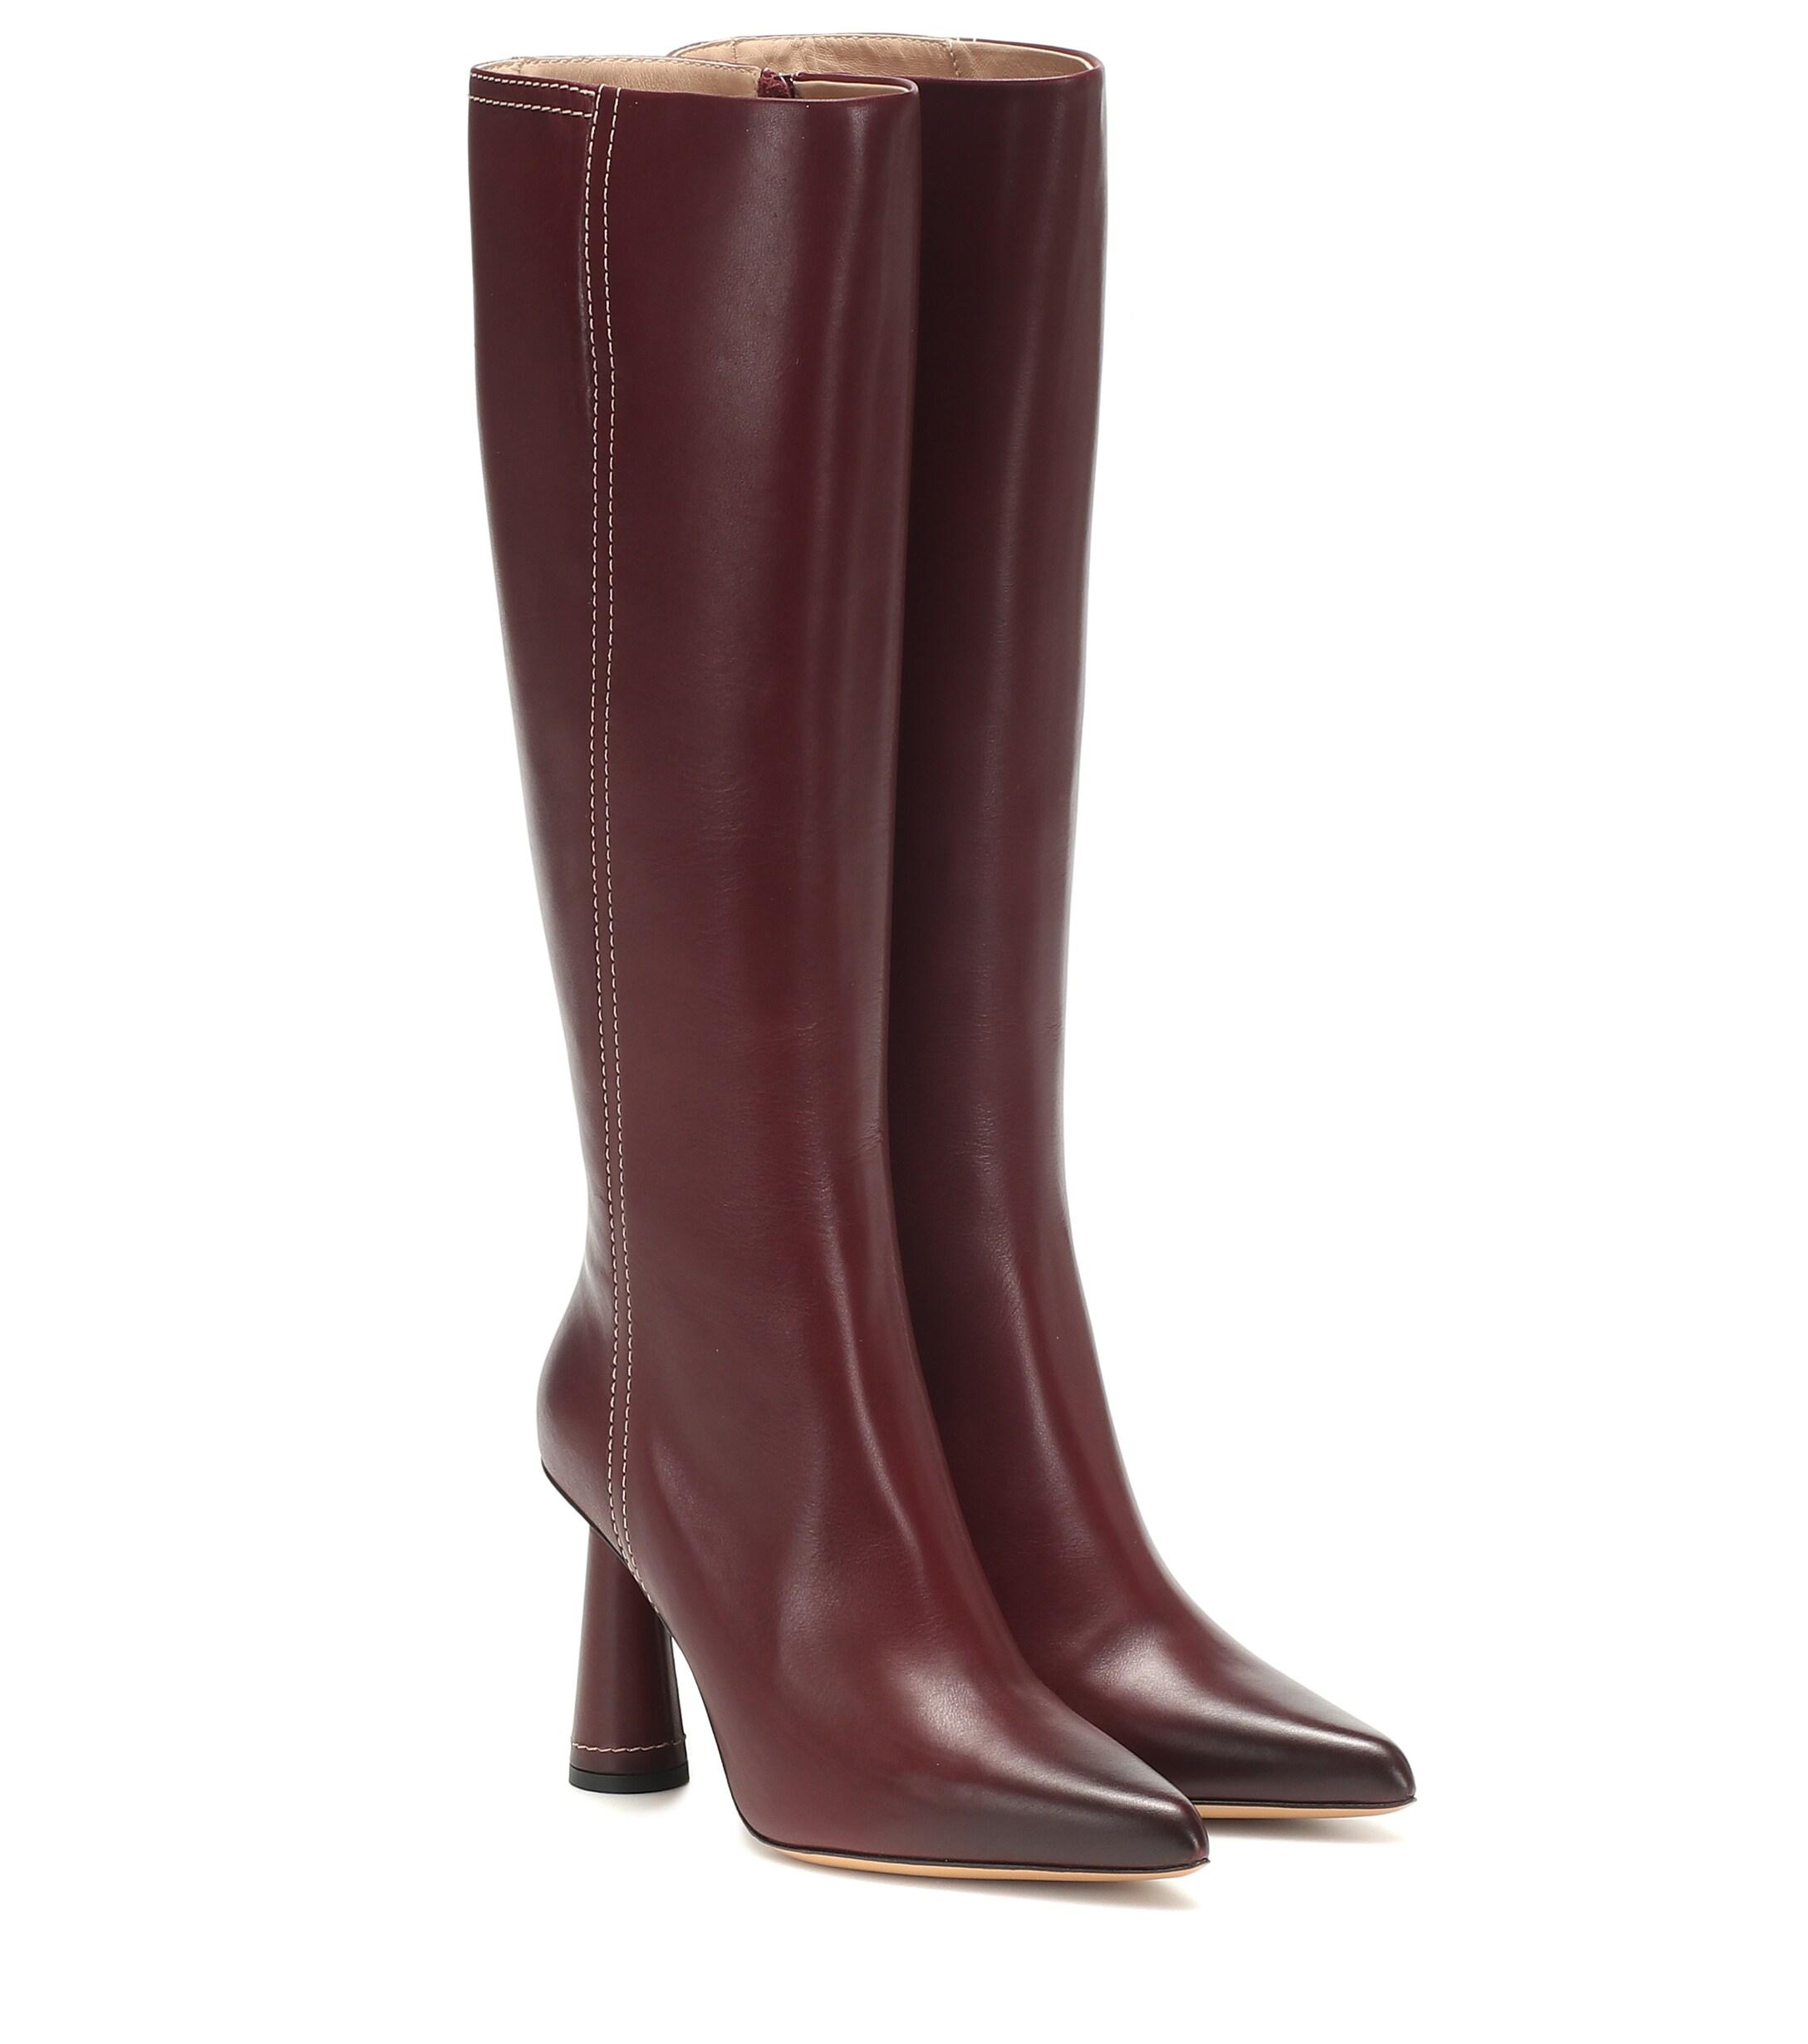 Jacquemus Les Bottes Leon Hautes Leather Boots in Red - Lyst